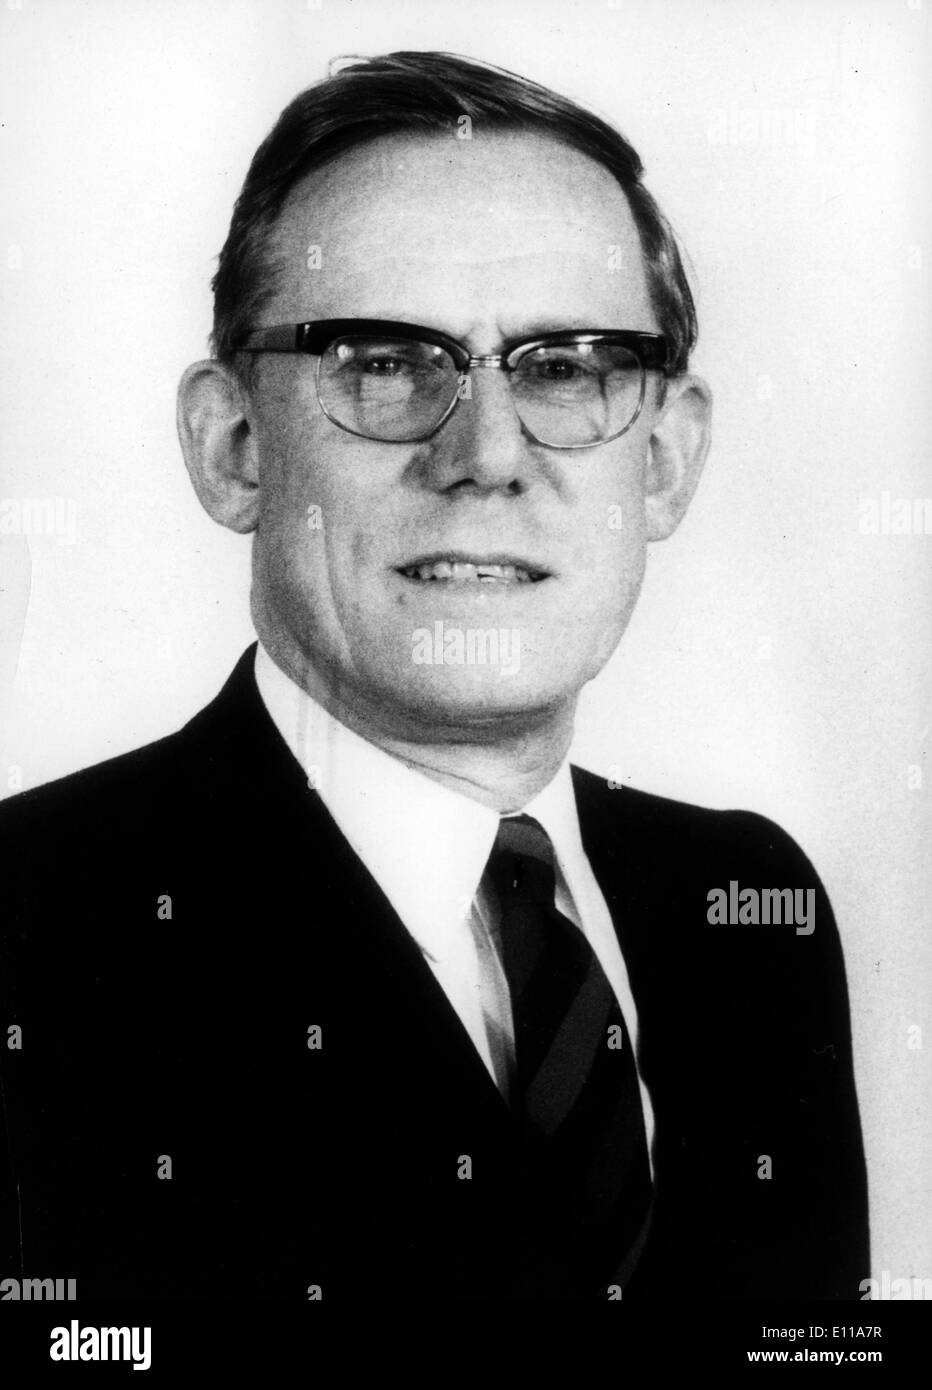 Sep 21, 1976; Paris, France; Mr. JEAN BARATTE, General Director and Member  of the Peugeot Automobiles Society, has been named by the Monitoring  Council of the Society as Director of the company.